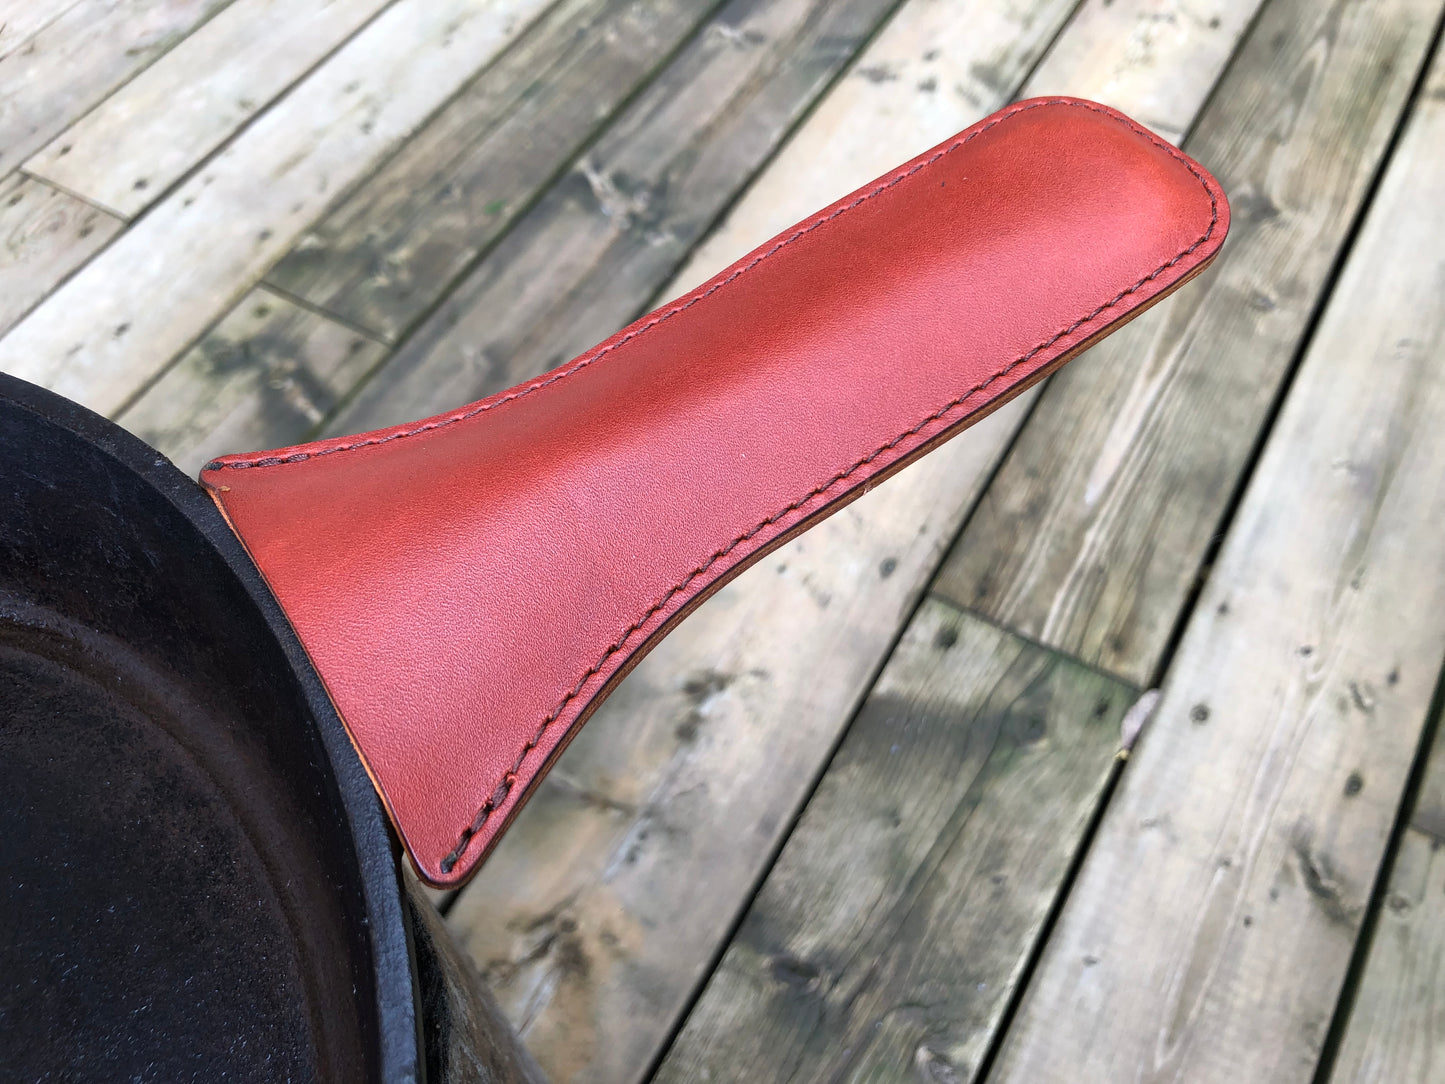 Large Cast Iron handle covers